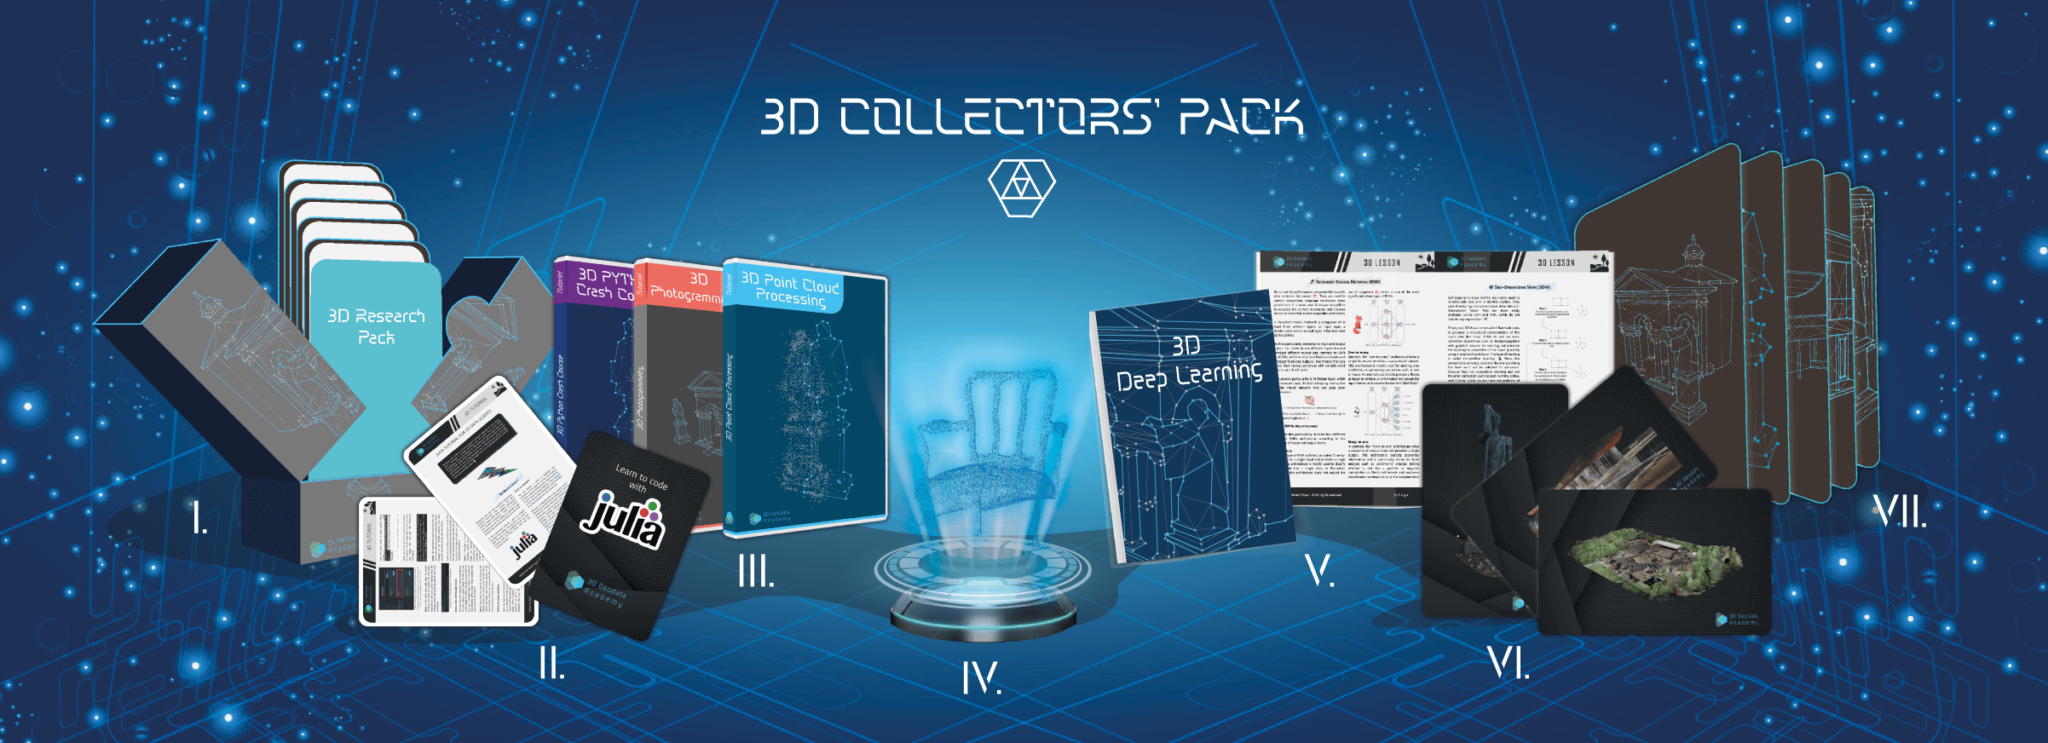 3D Collector pack